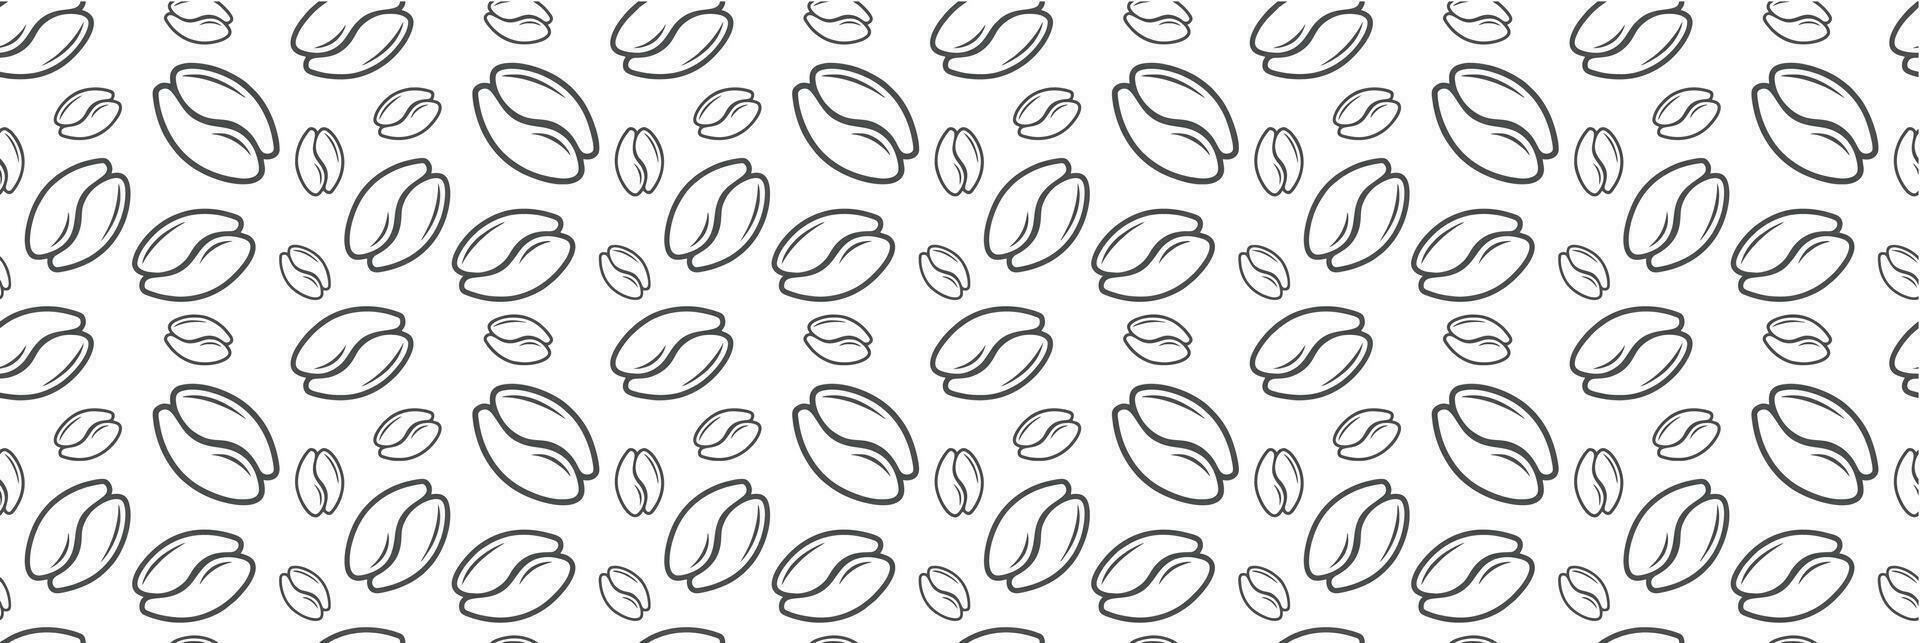 Coffee pattern design, coffee beans seamless pattern for packaging design, latte espresso cappuccino label template illustration, coffee drink pattern editable vector file